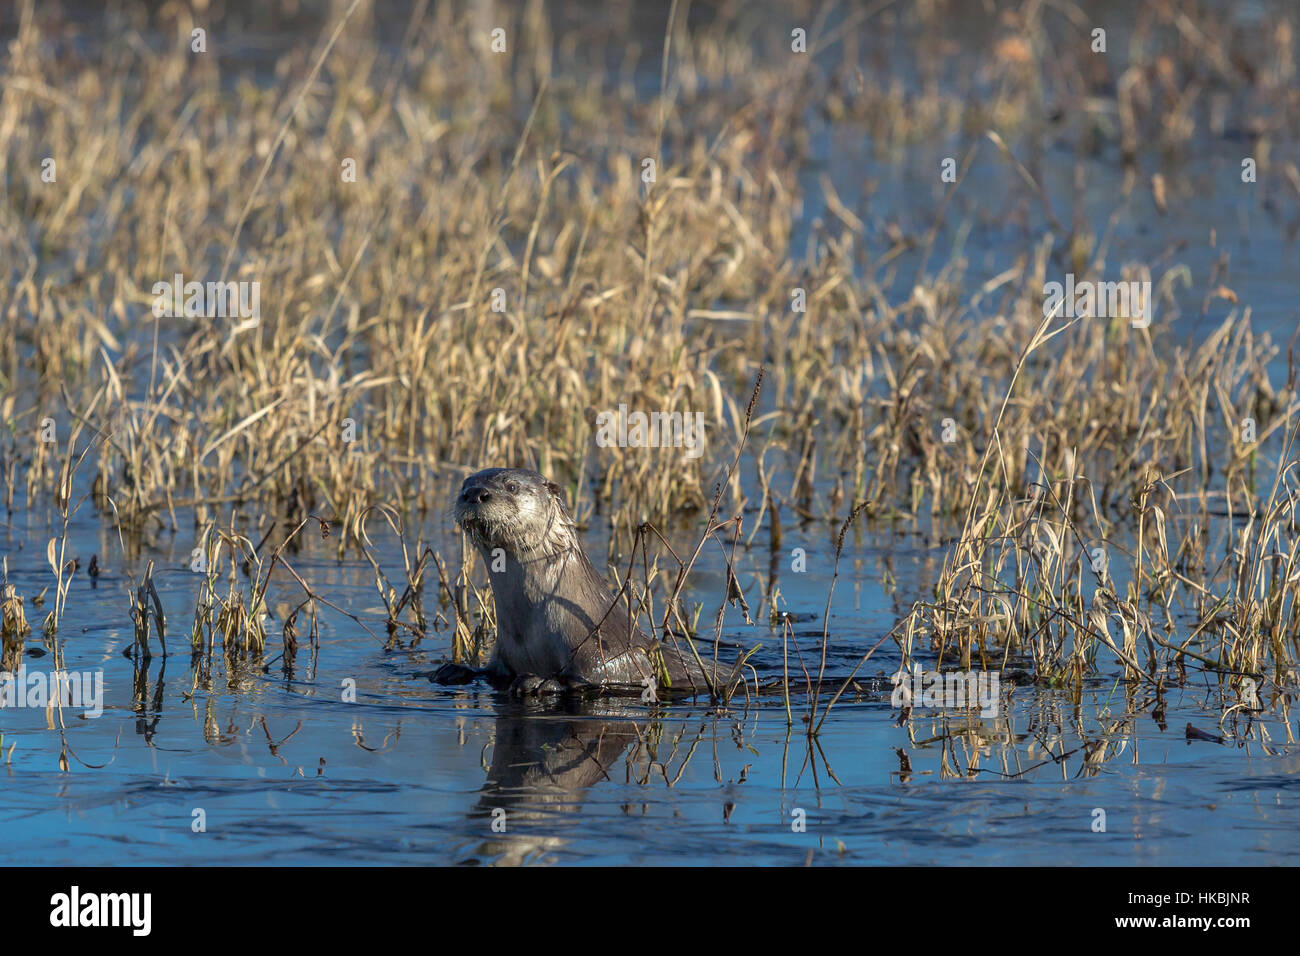 Northern river otter in Wisconsin Stock Photo